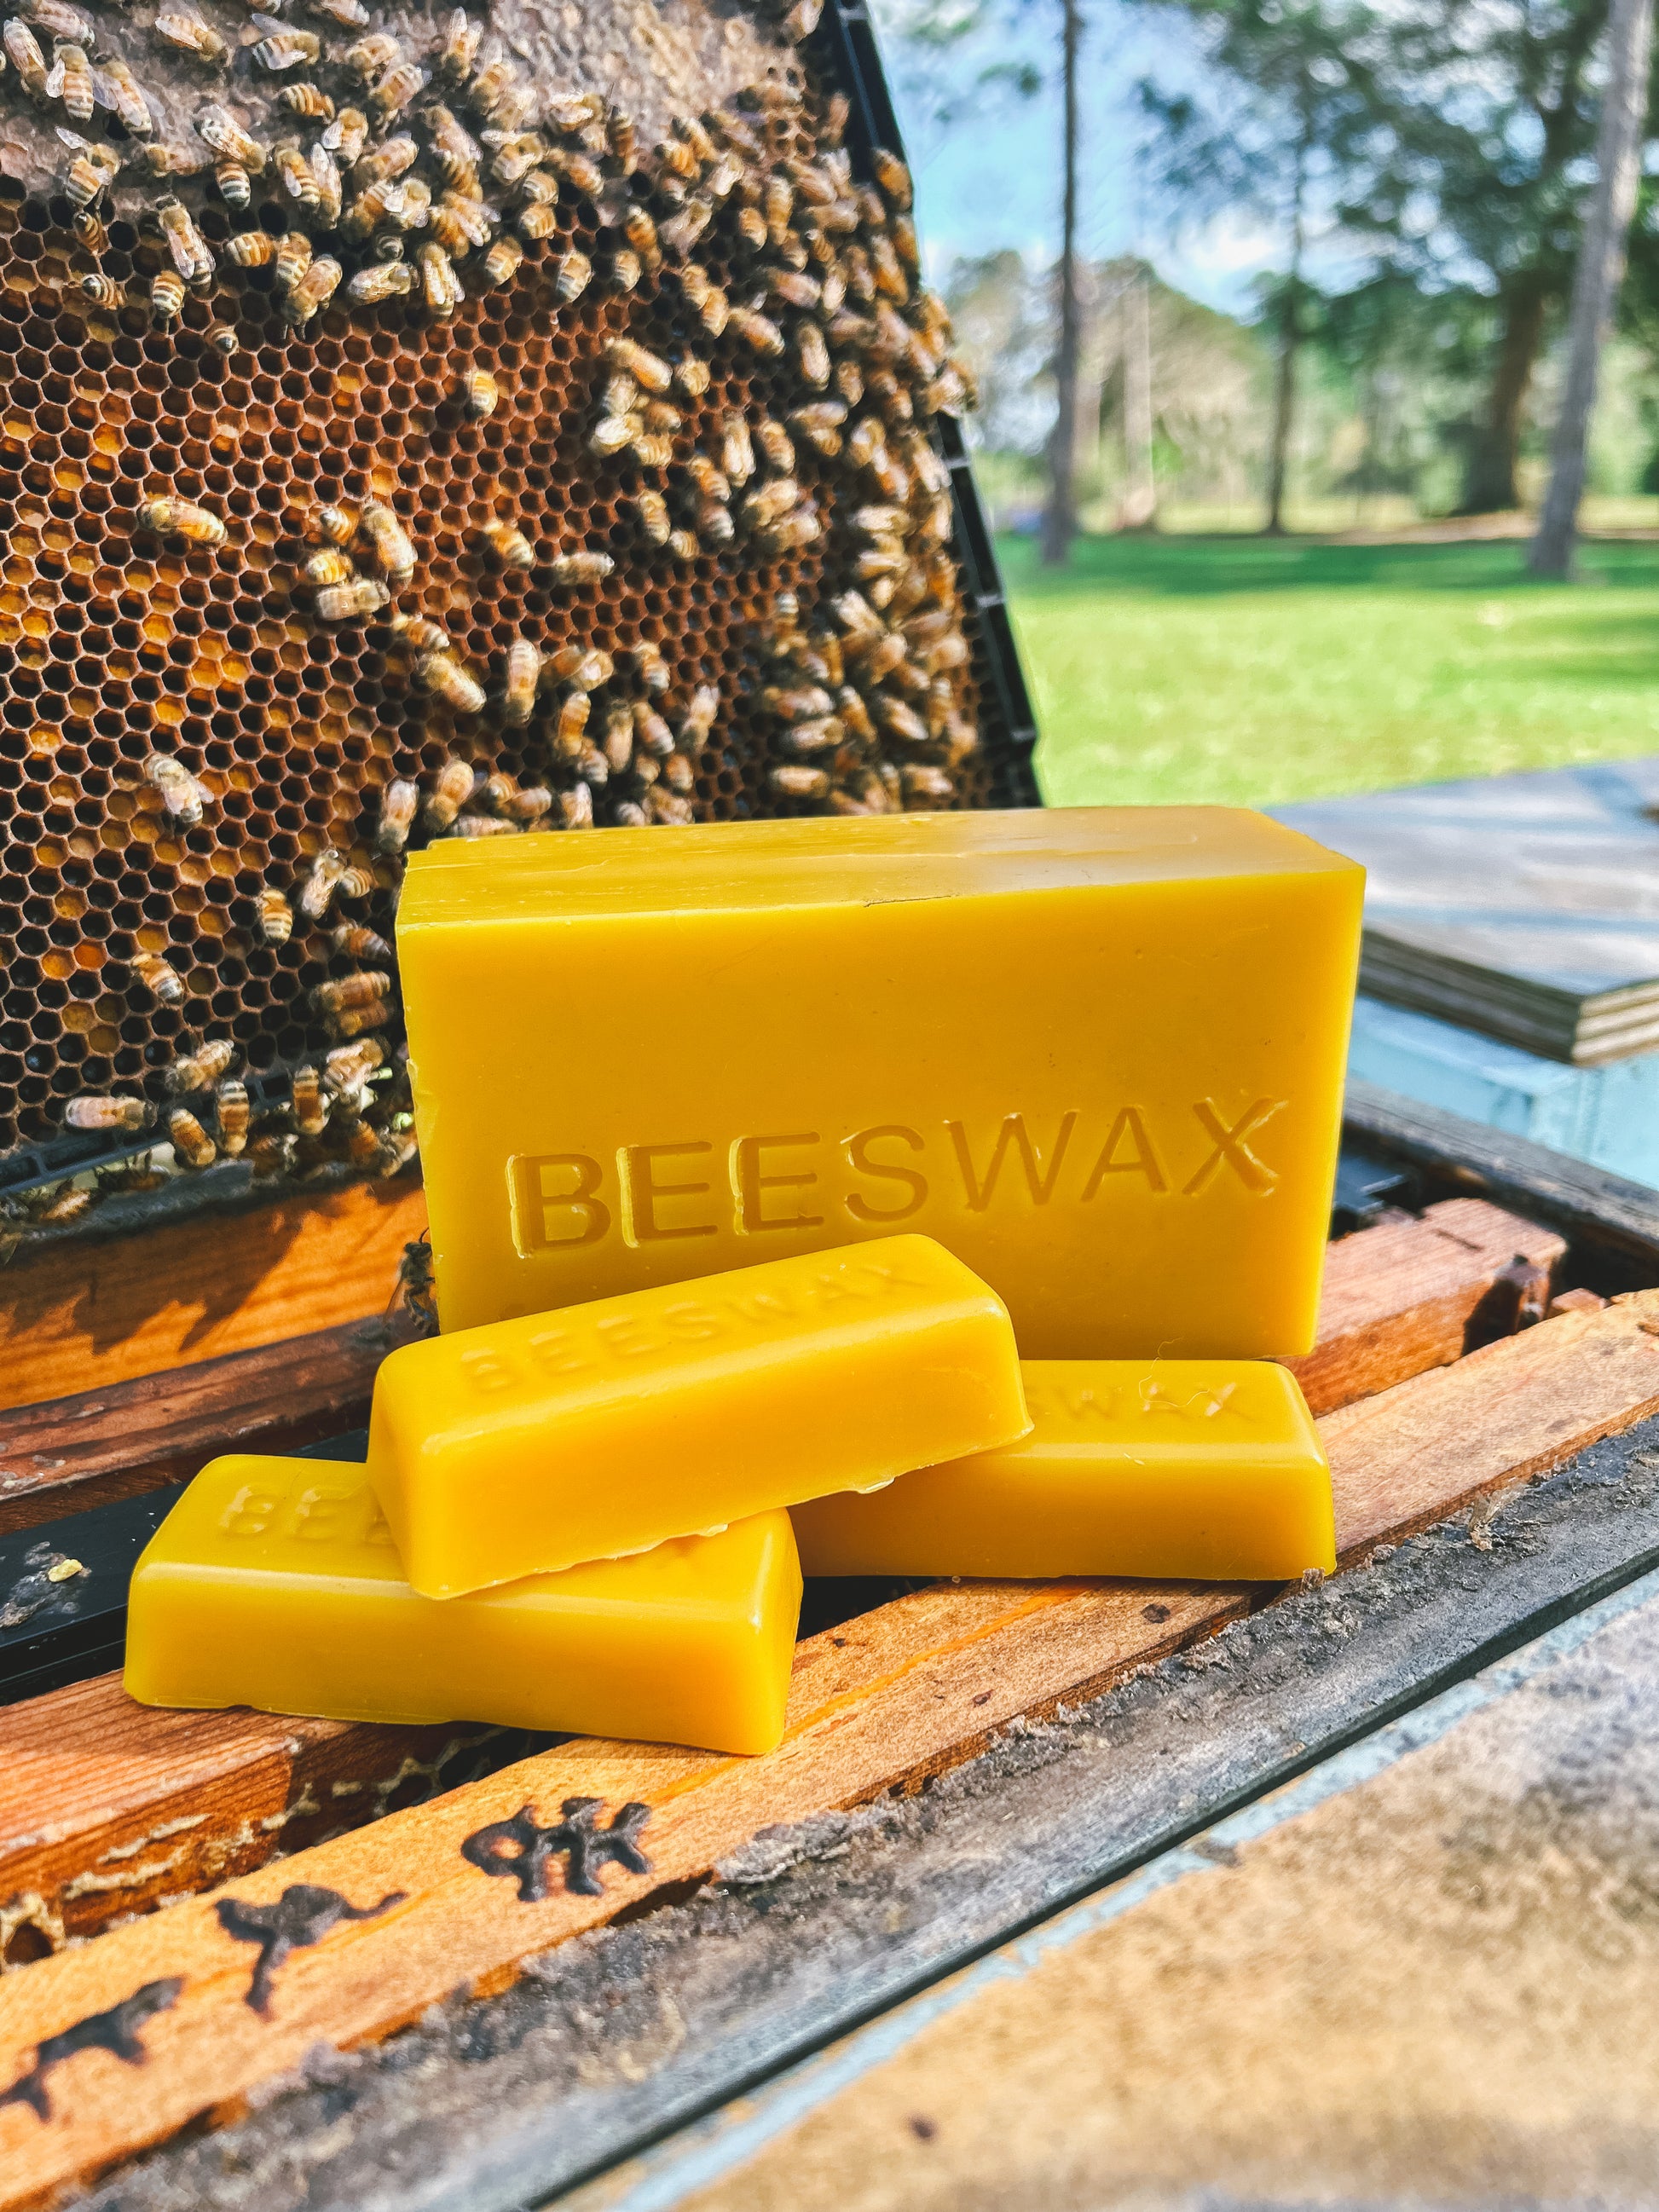 100% Pure Beeswax Raw Wax From Bees Natural Organic Beeswax for